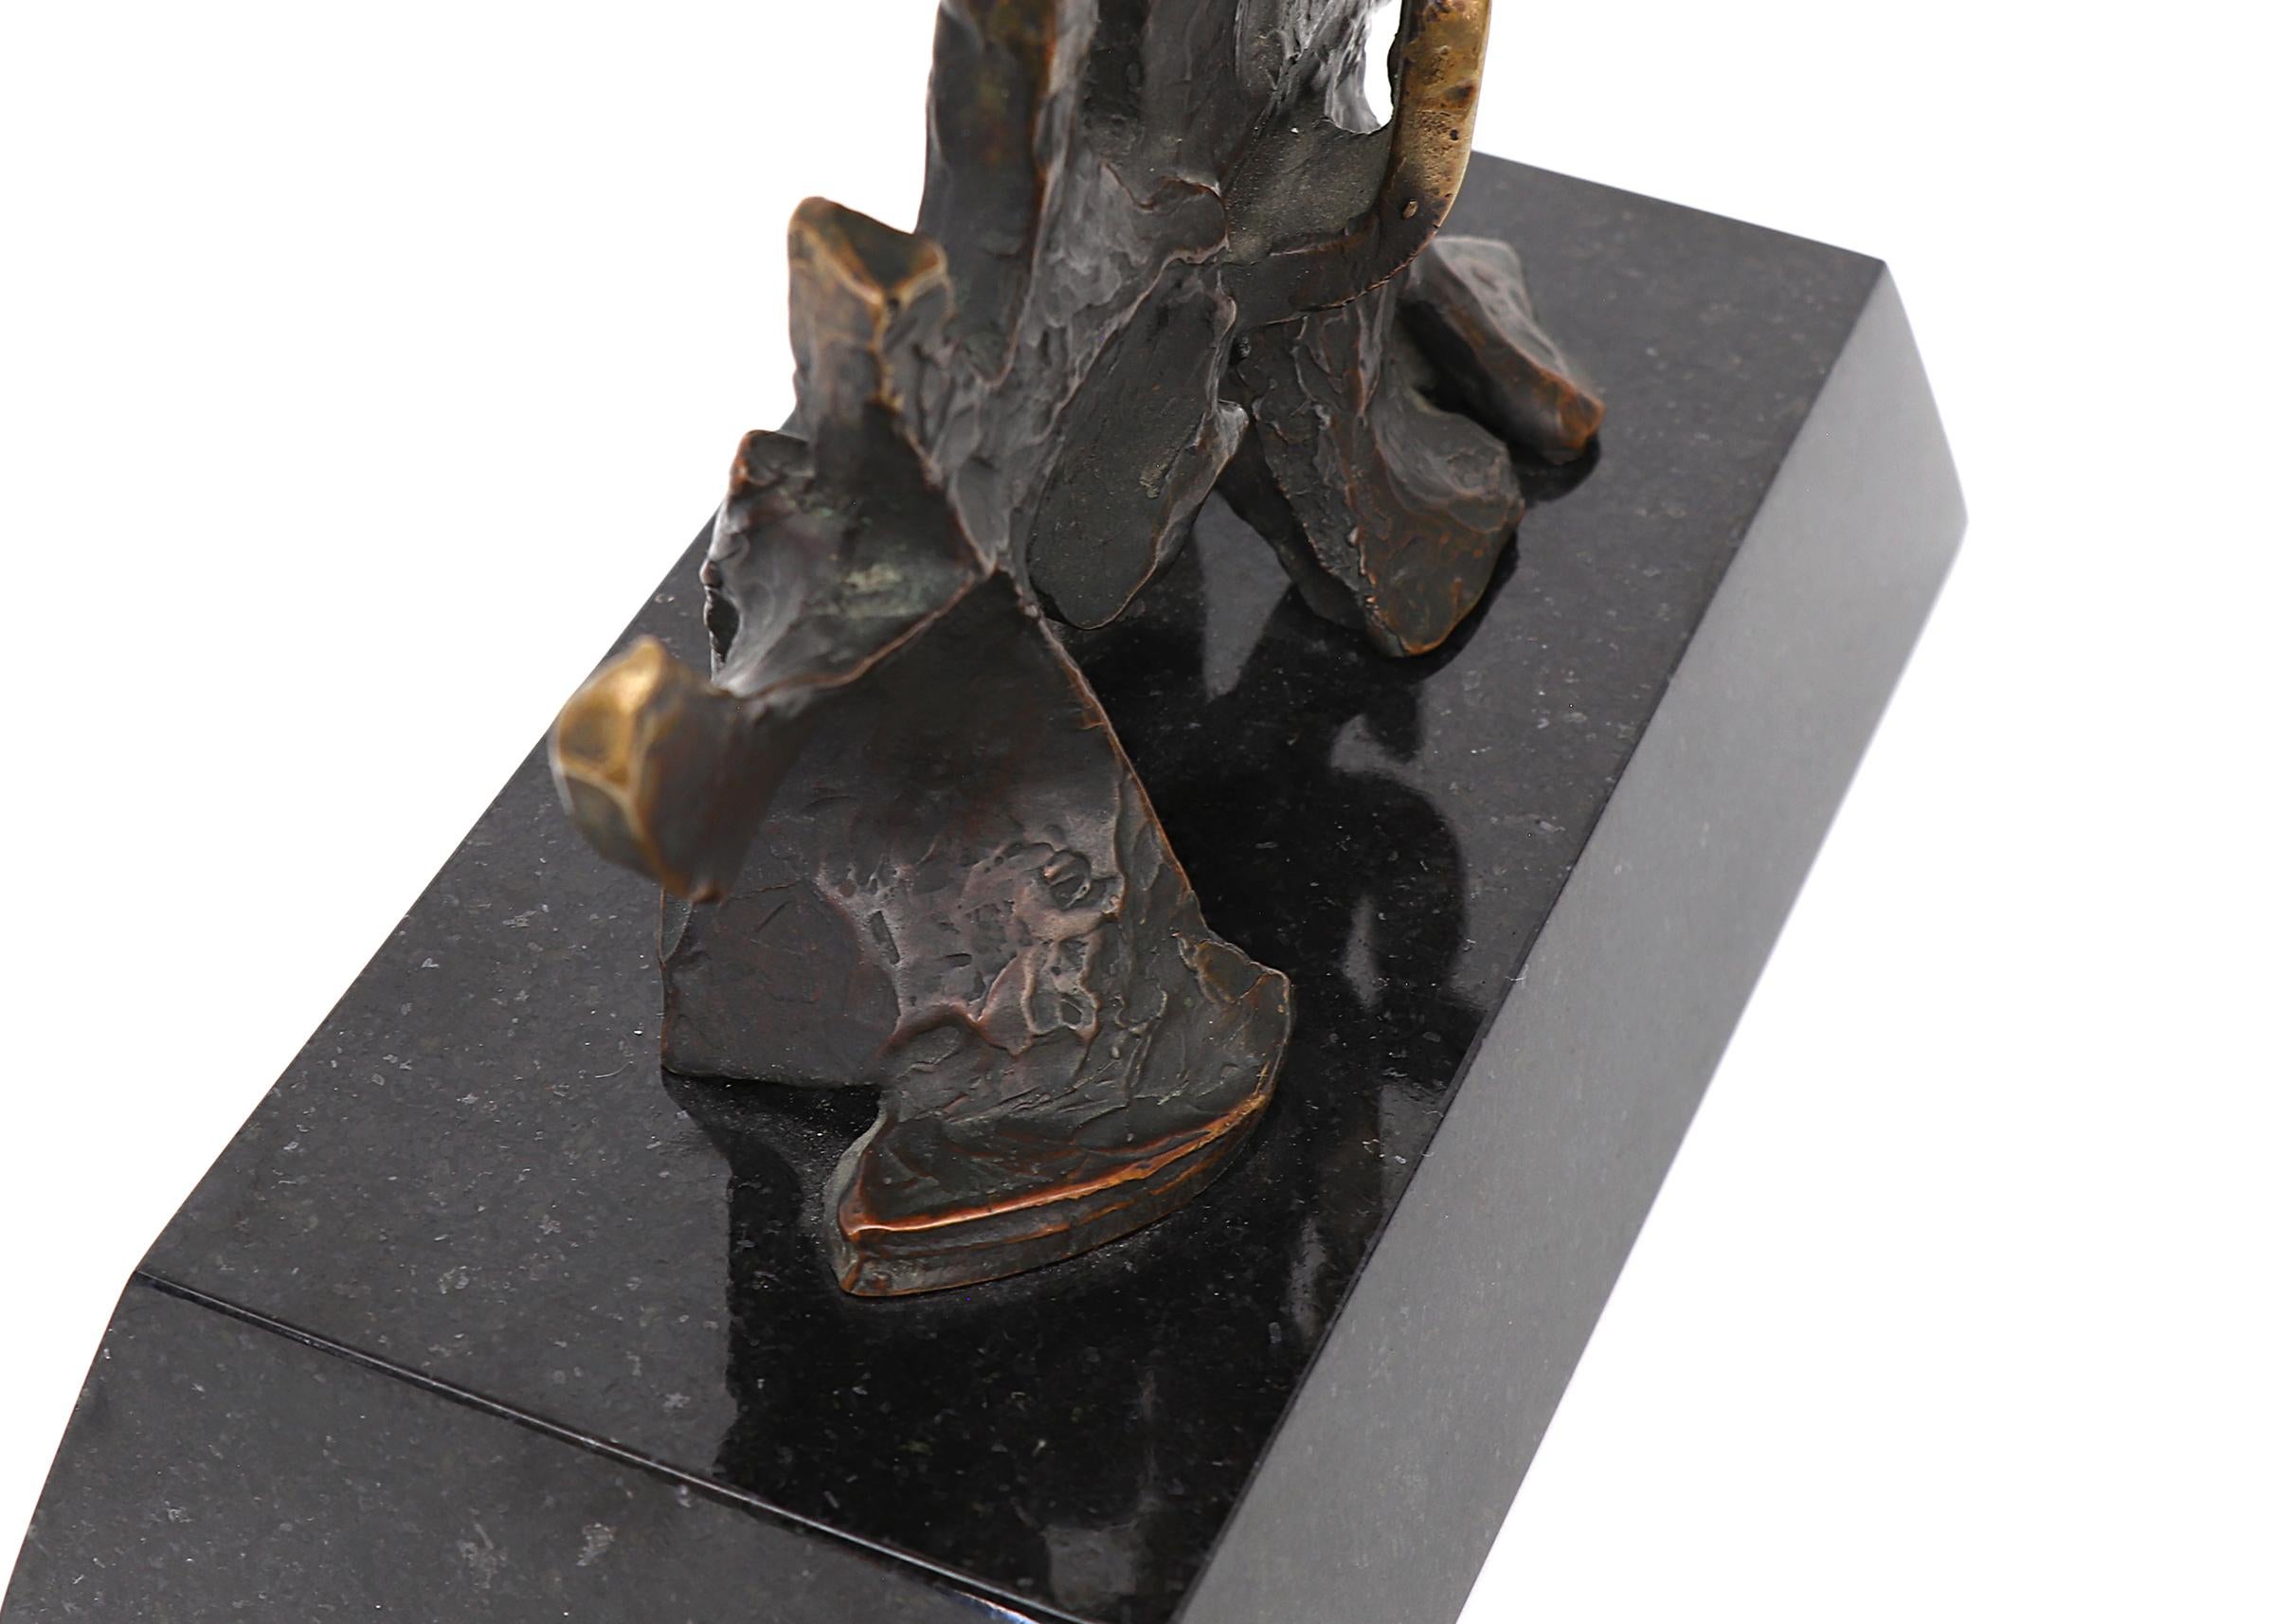 American Modern Abstract Bronze Sculpture on Granite Stand, Edward Chavez For Sale 5